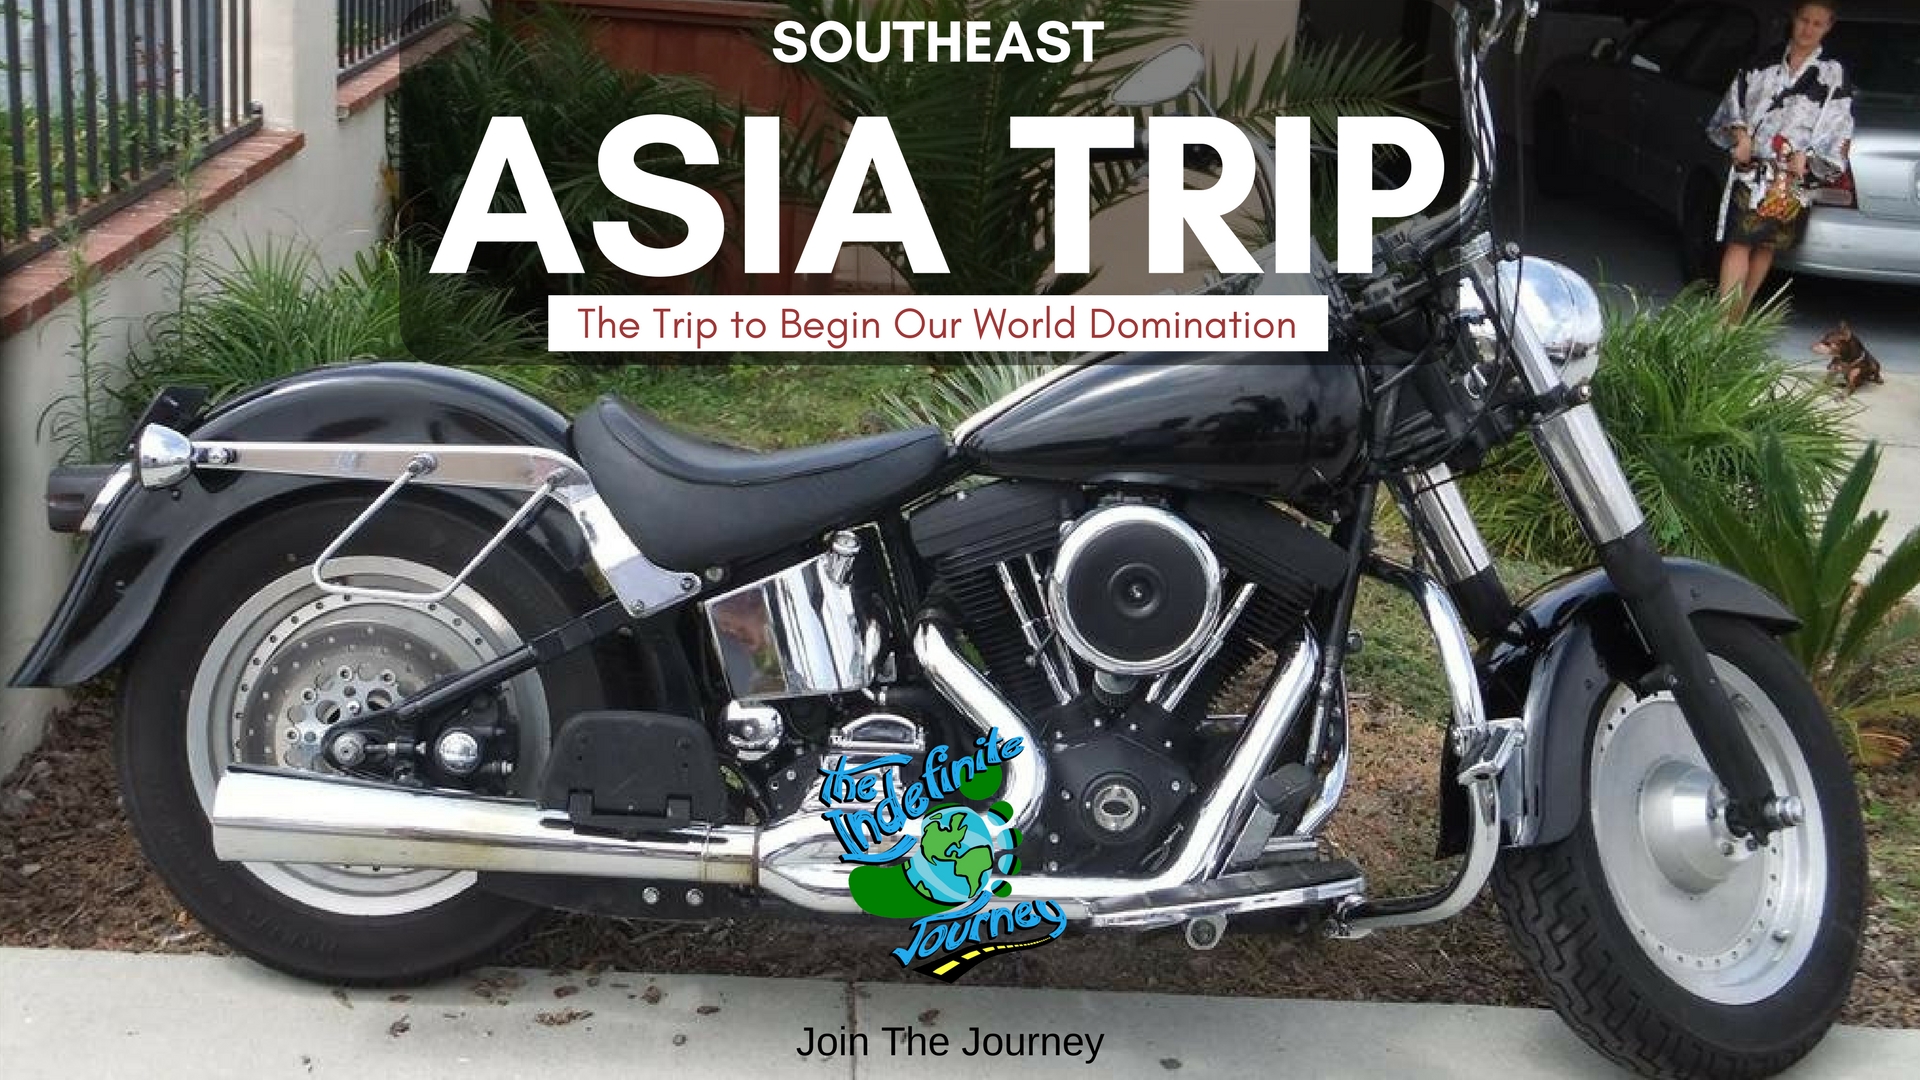 Southeast Asia Trip- The Trip to Begin Our World Domination